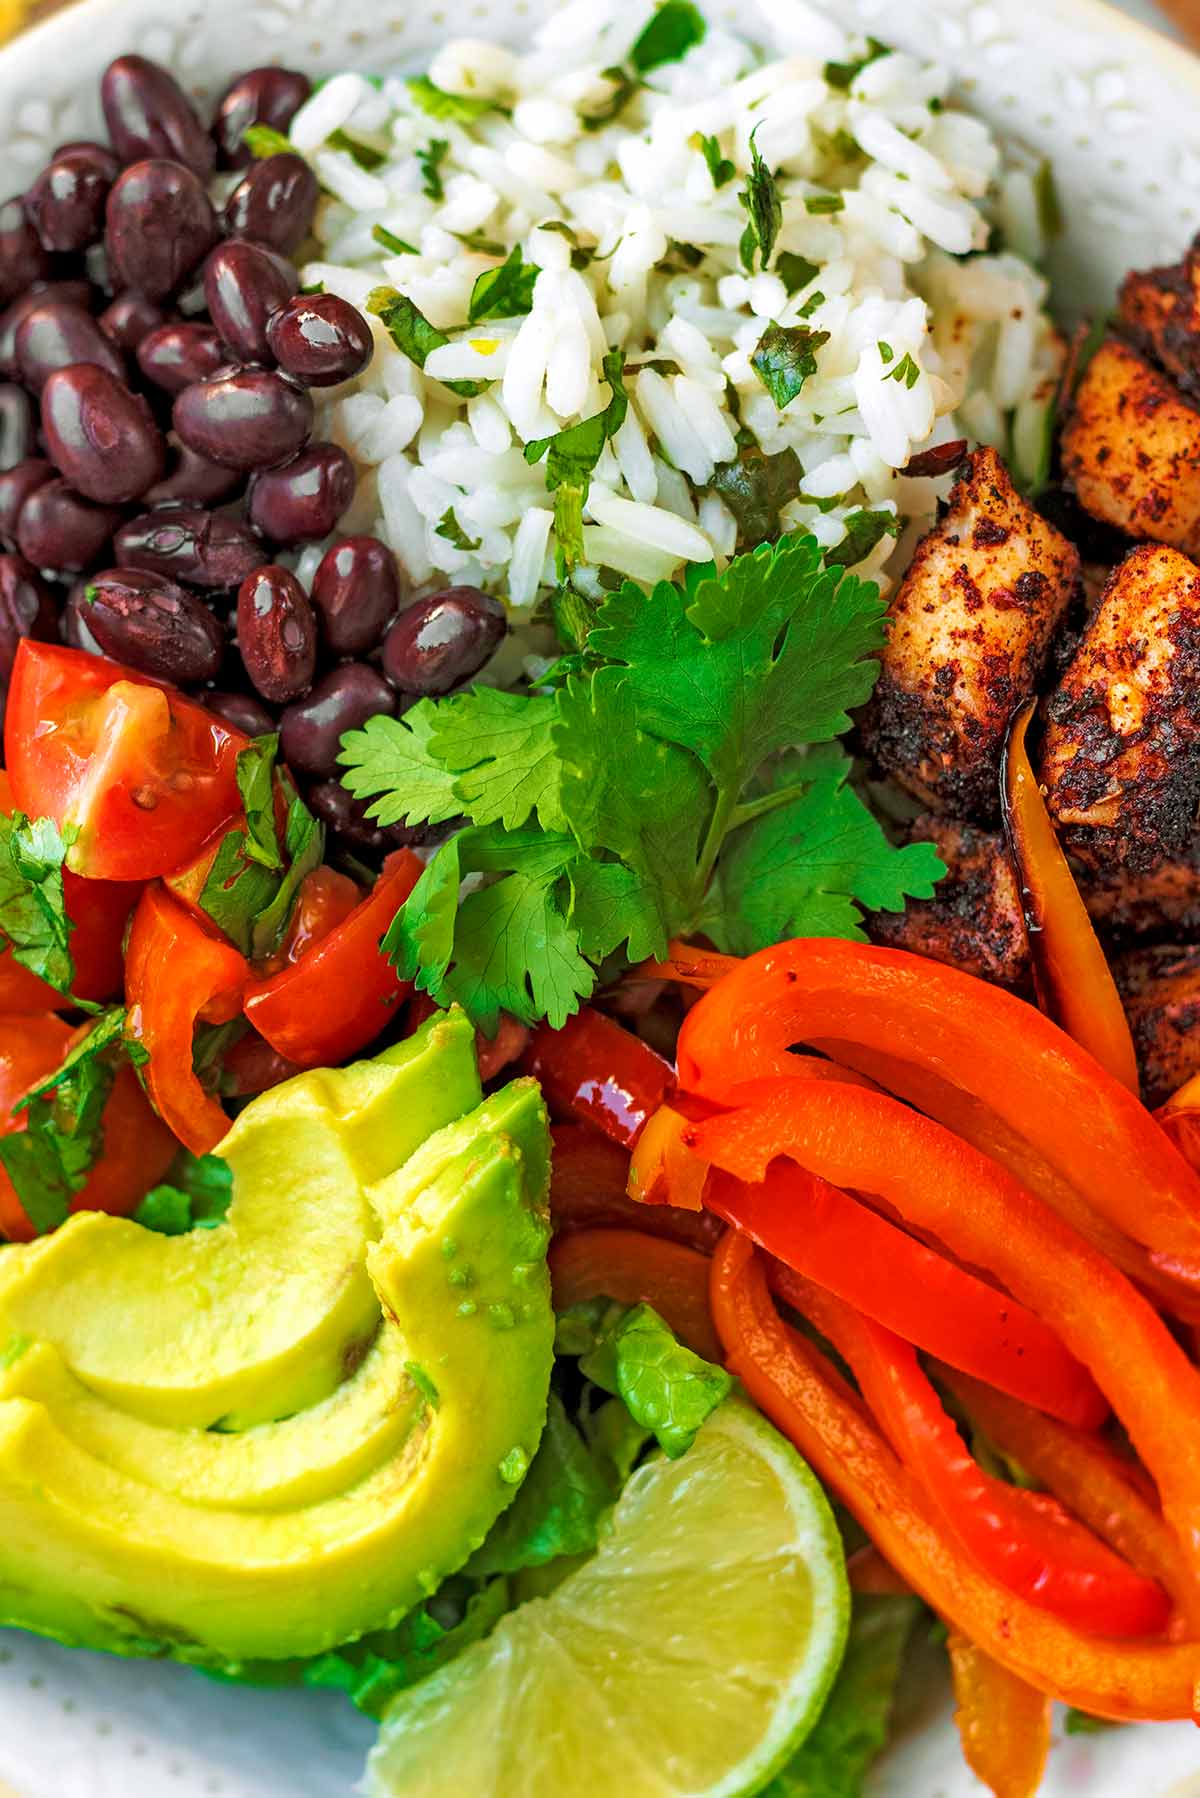 Sliced avocado, chopped tomatoes, black beans, cooked rice, seasoned chicken chunks, sliced red pepper and a lime wedge, all in a bowl together.